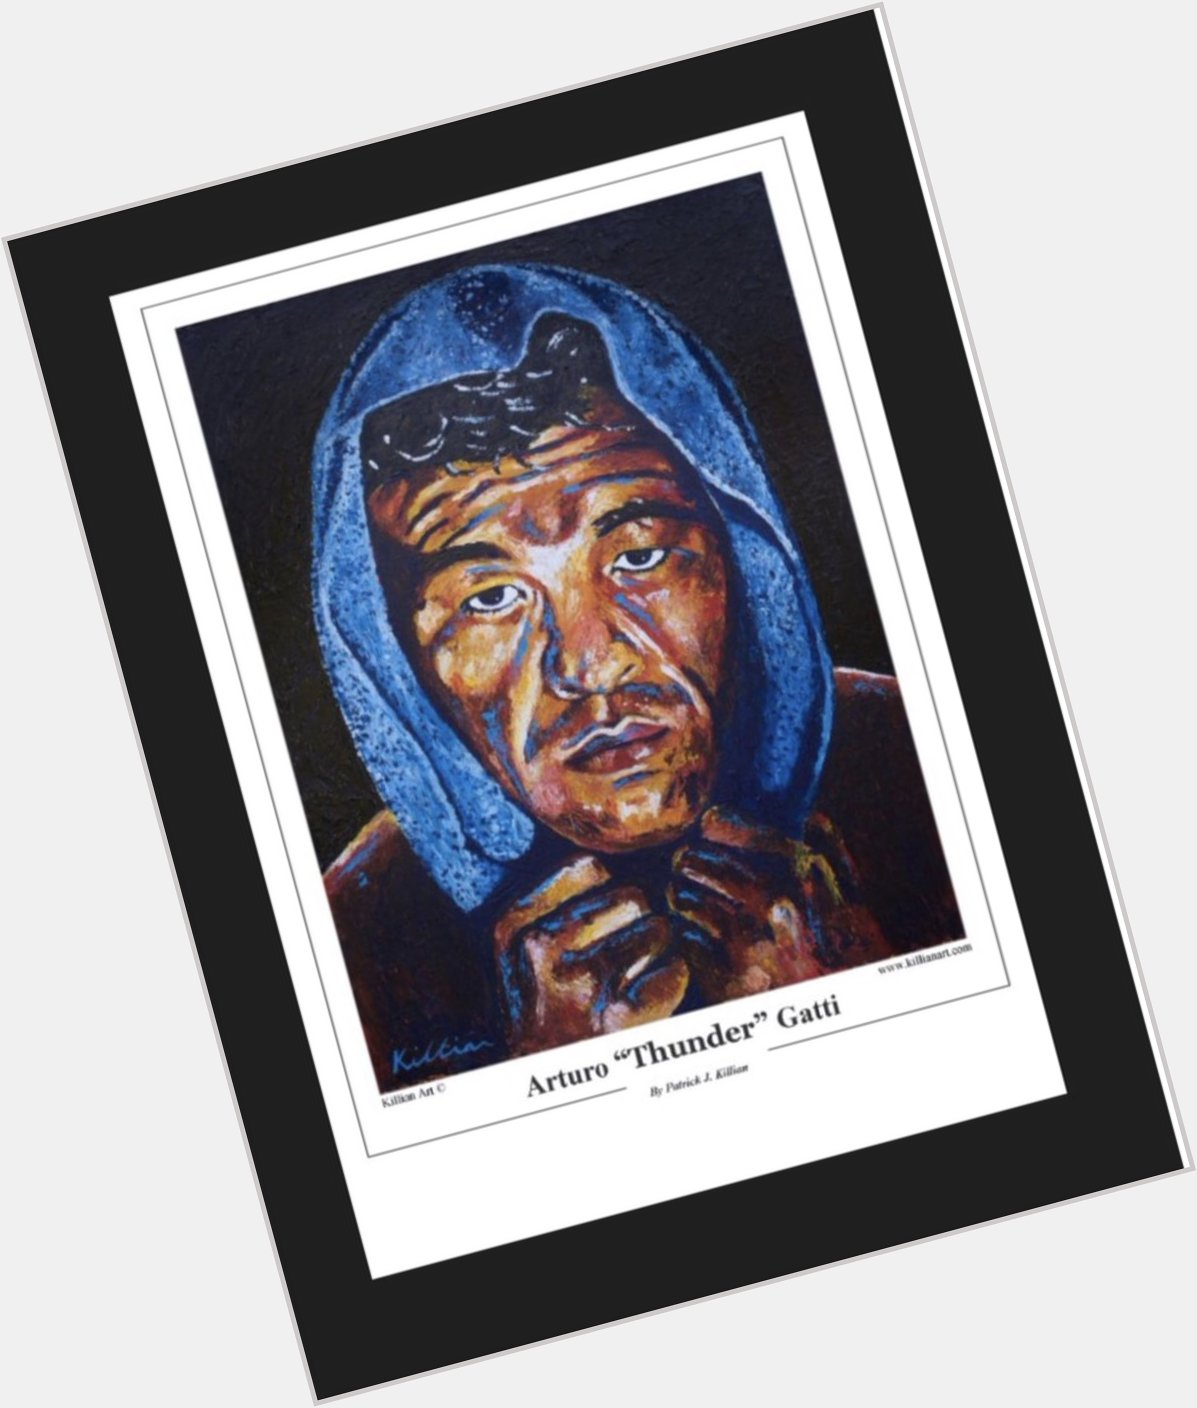 Happy Bday to the warrior Arturo Gatti - He would have been 49 today  